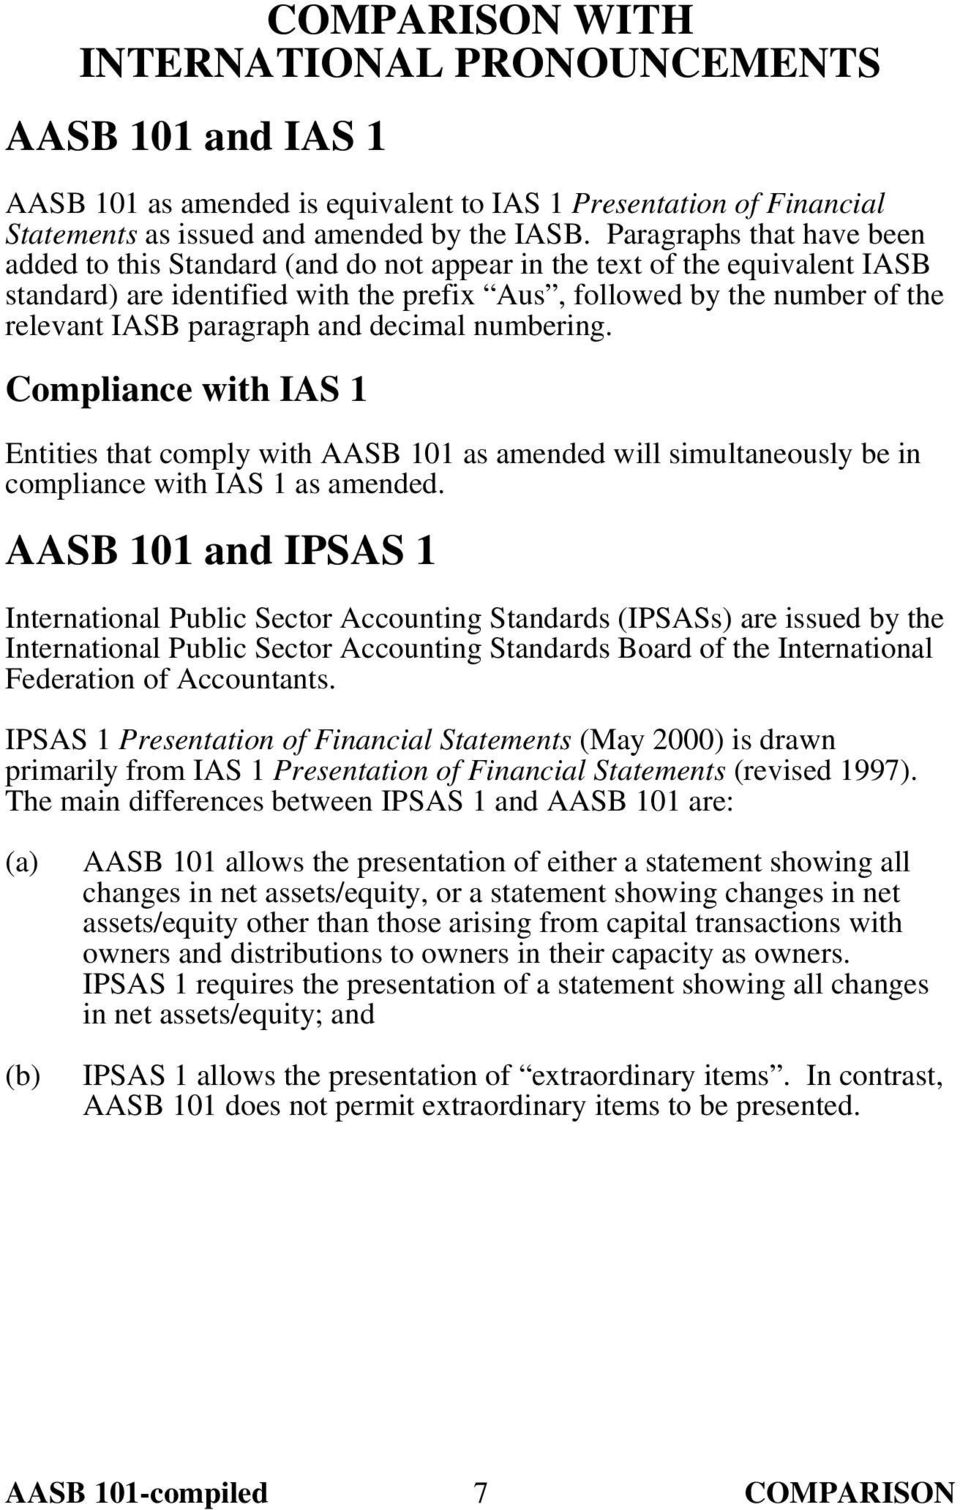 paragraph and decimal numbering. Compliance with IAS 1 Entities that comply with AASB 101 as amended will simultaneously be in compliance with IAS 1 as amended.